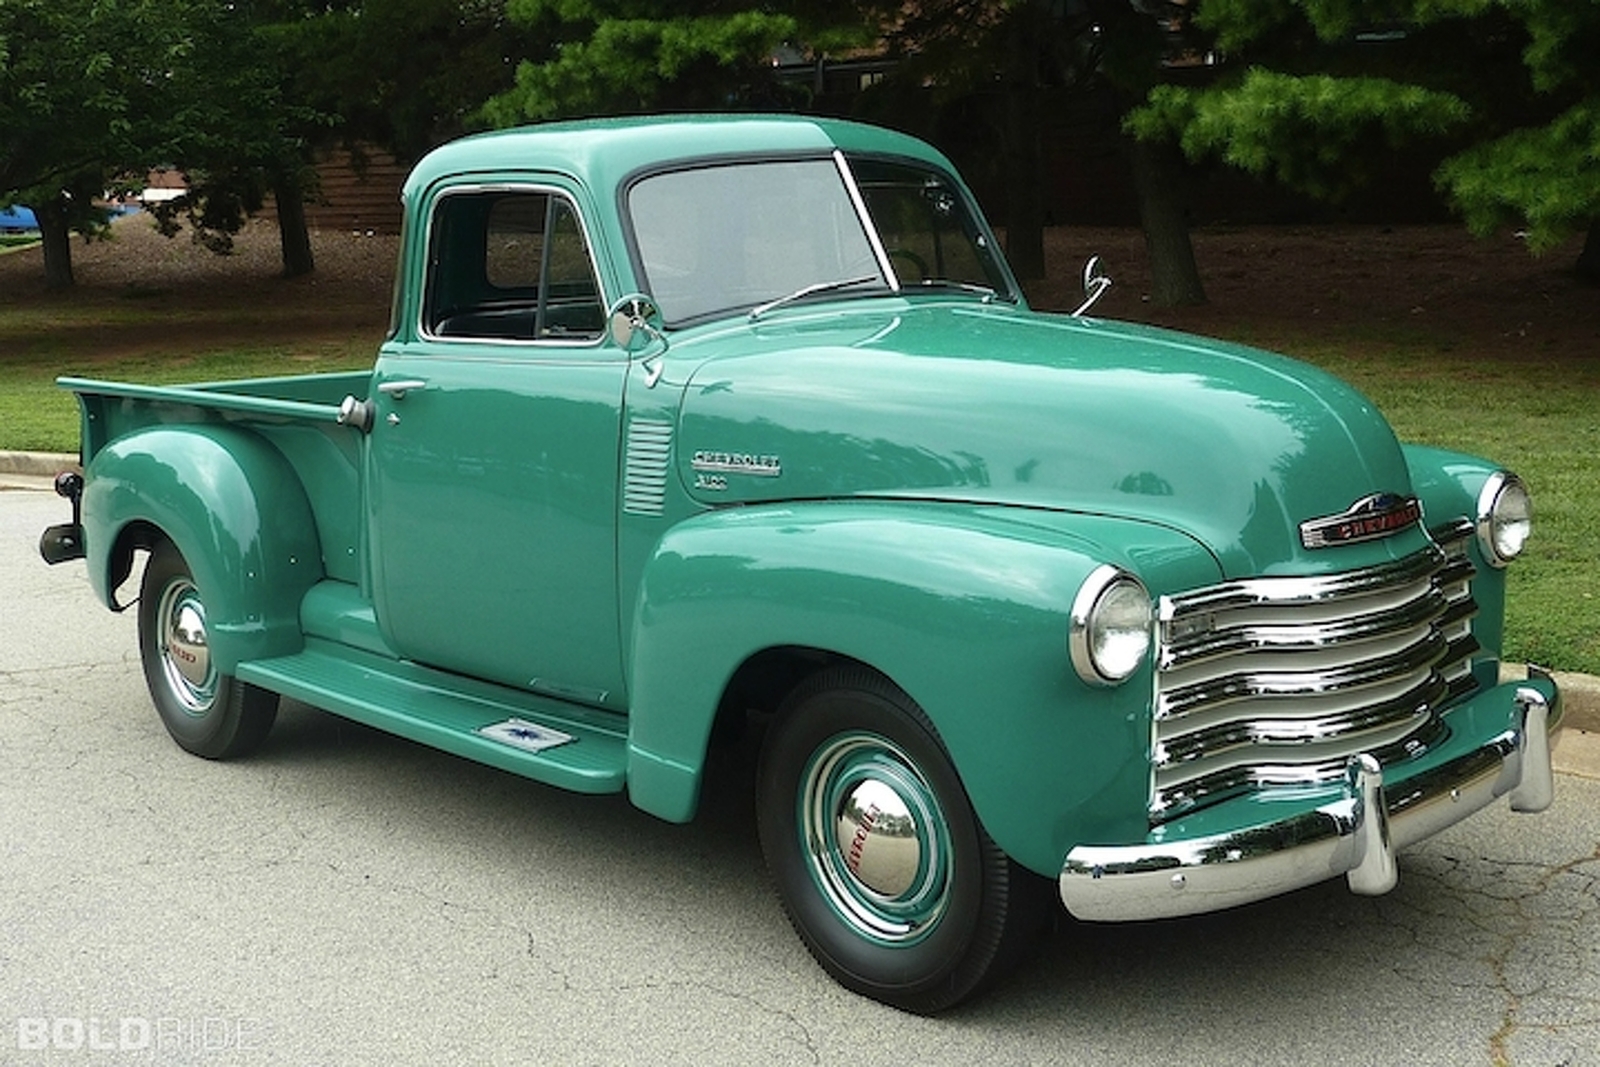 beautiful-practicality-5-unforgettable-pickups-of-the-1950s.jpg